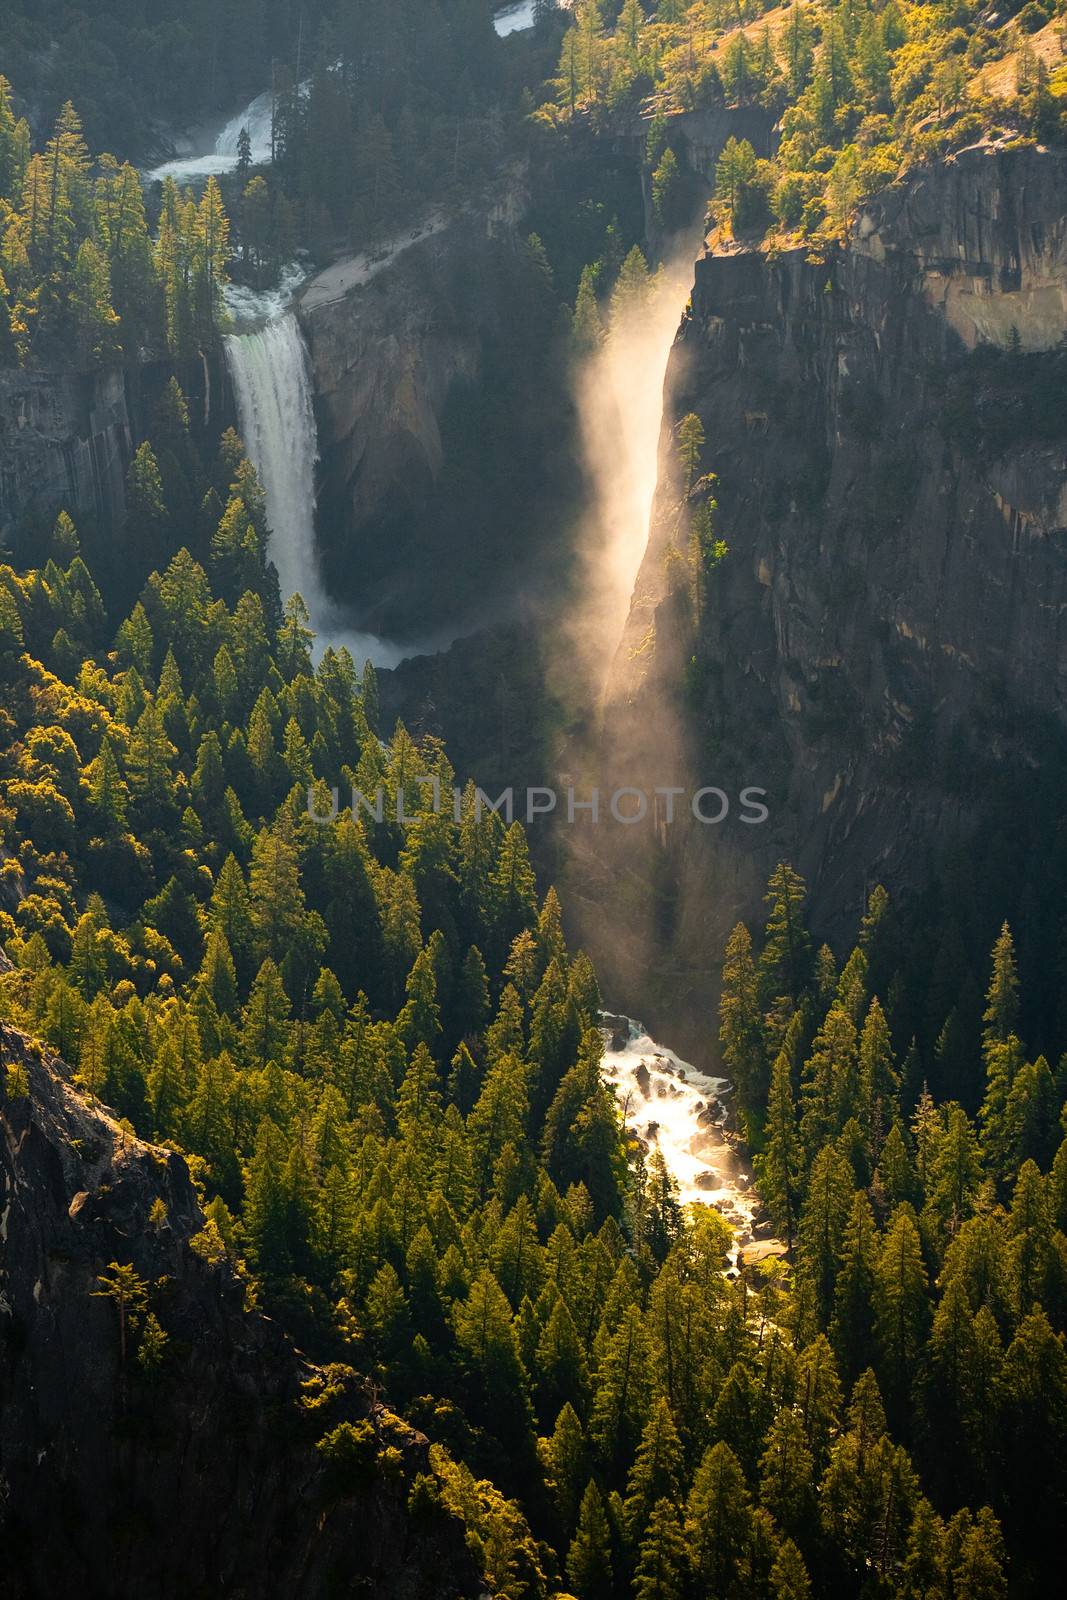 Aerial view of a waterfall in a forest, Vernal Fall, Glacier Point, Yosemite Valley, Yosemite National Park, California, USA